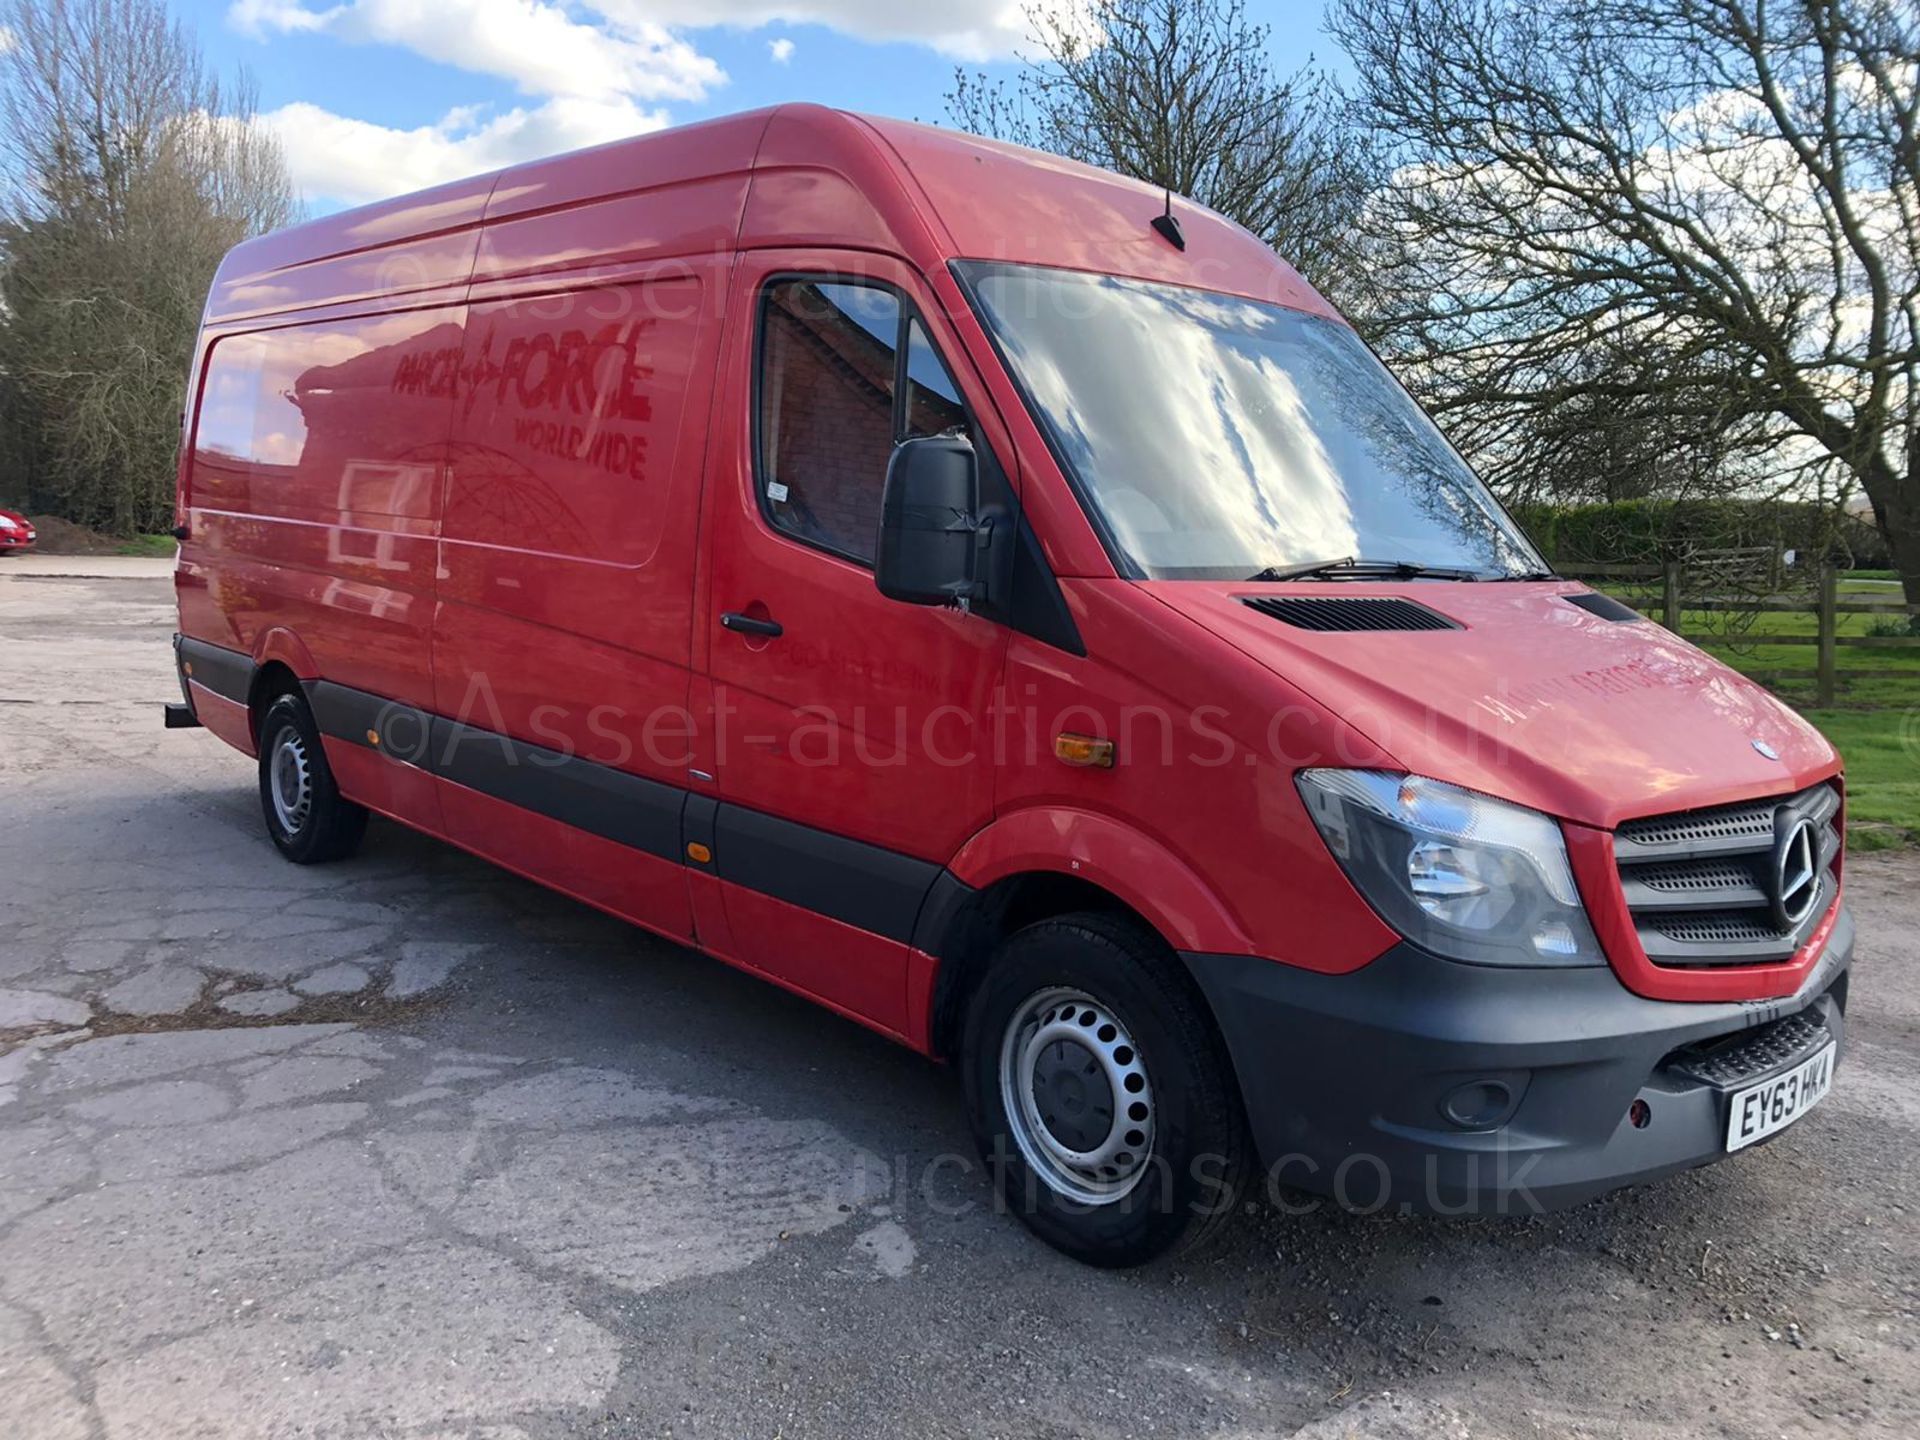 2013 MERCEDES-BENZ SPRINTER 310 CDI, DIESEL ENGINE, SHOWING 0 PREVIOUS KEEPERS *PLUS VAT* - Image 2 of 12